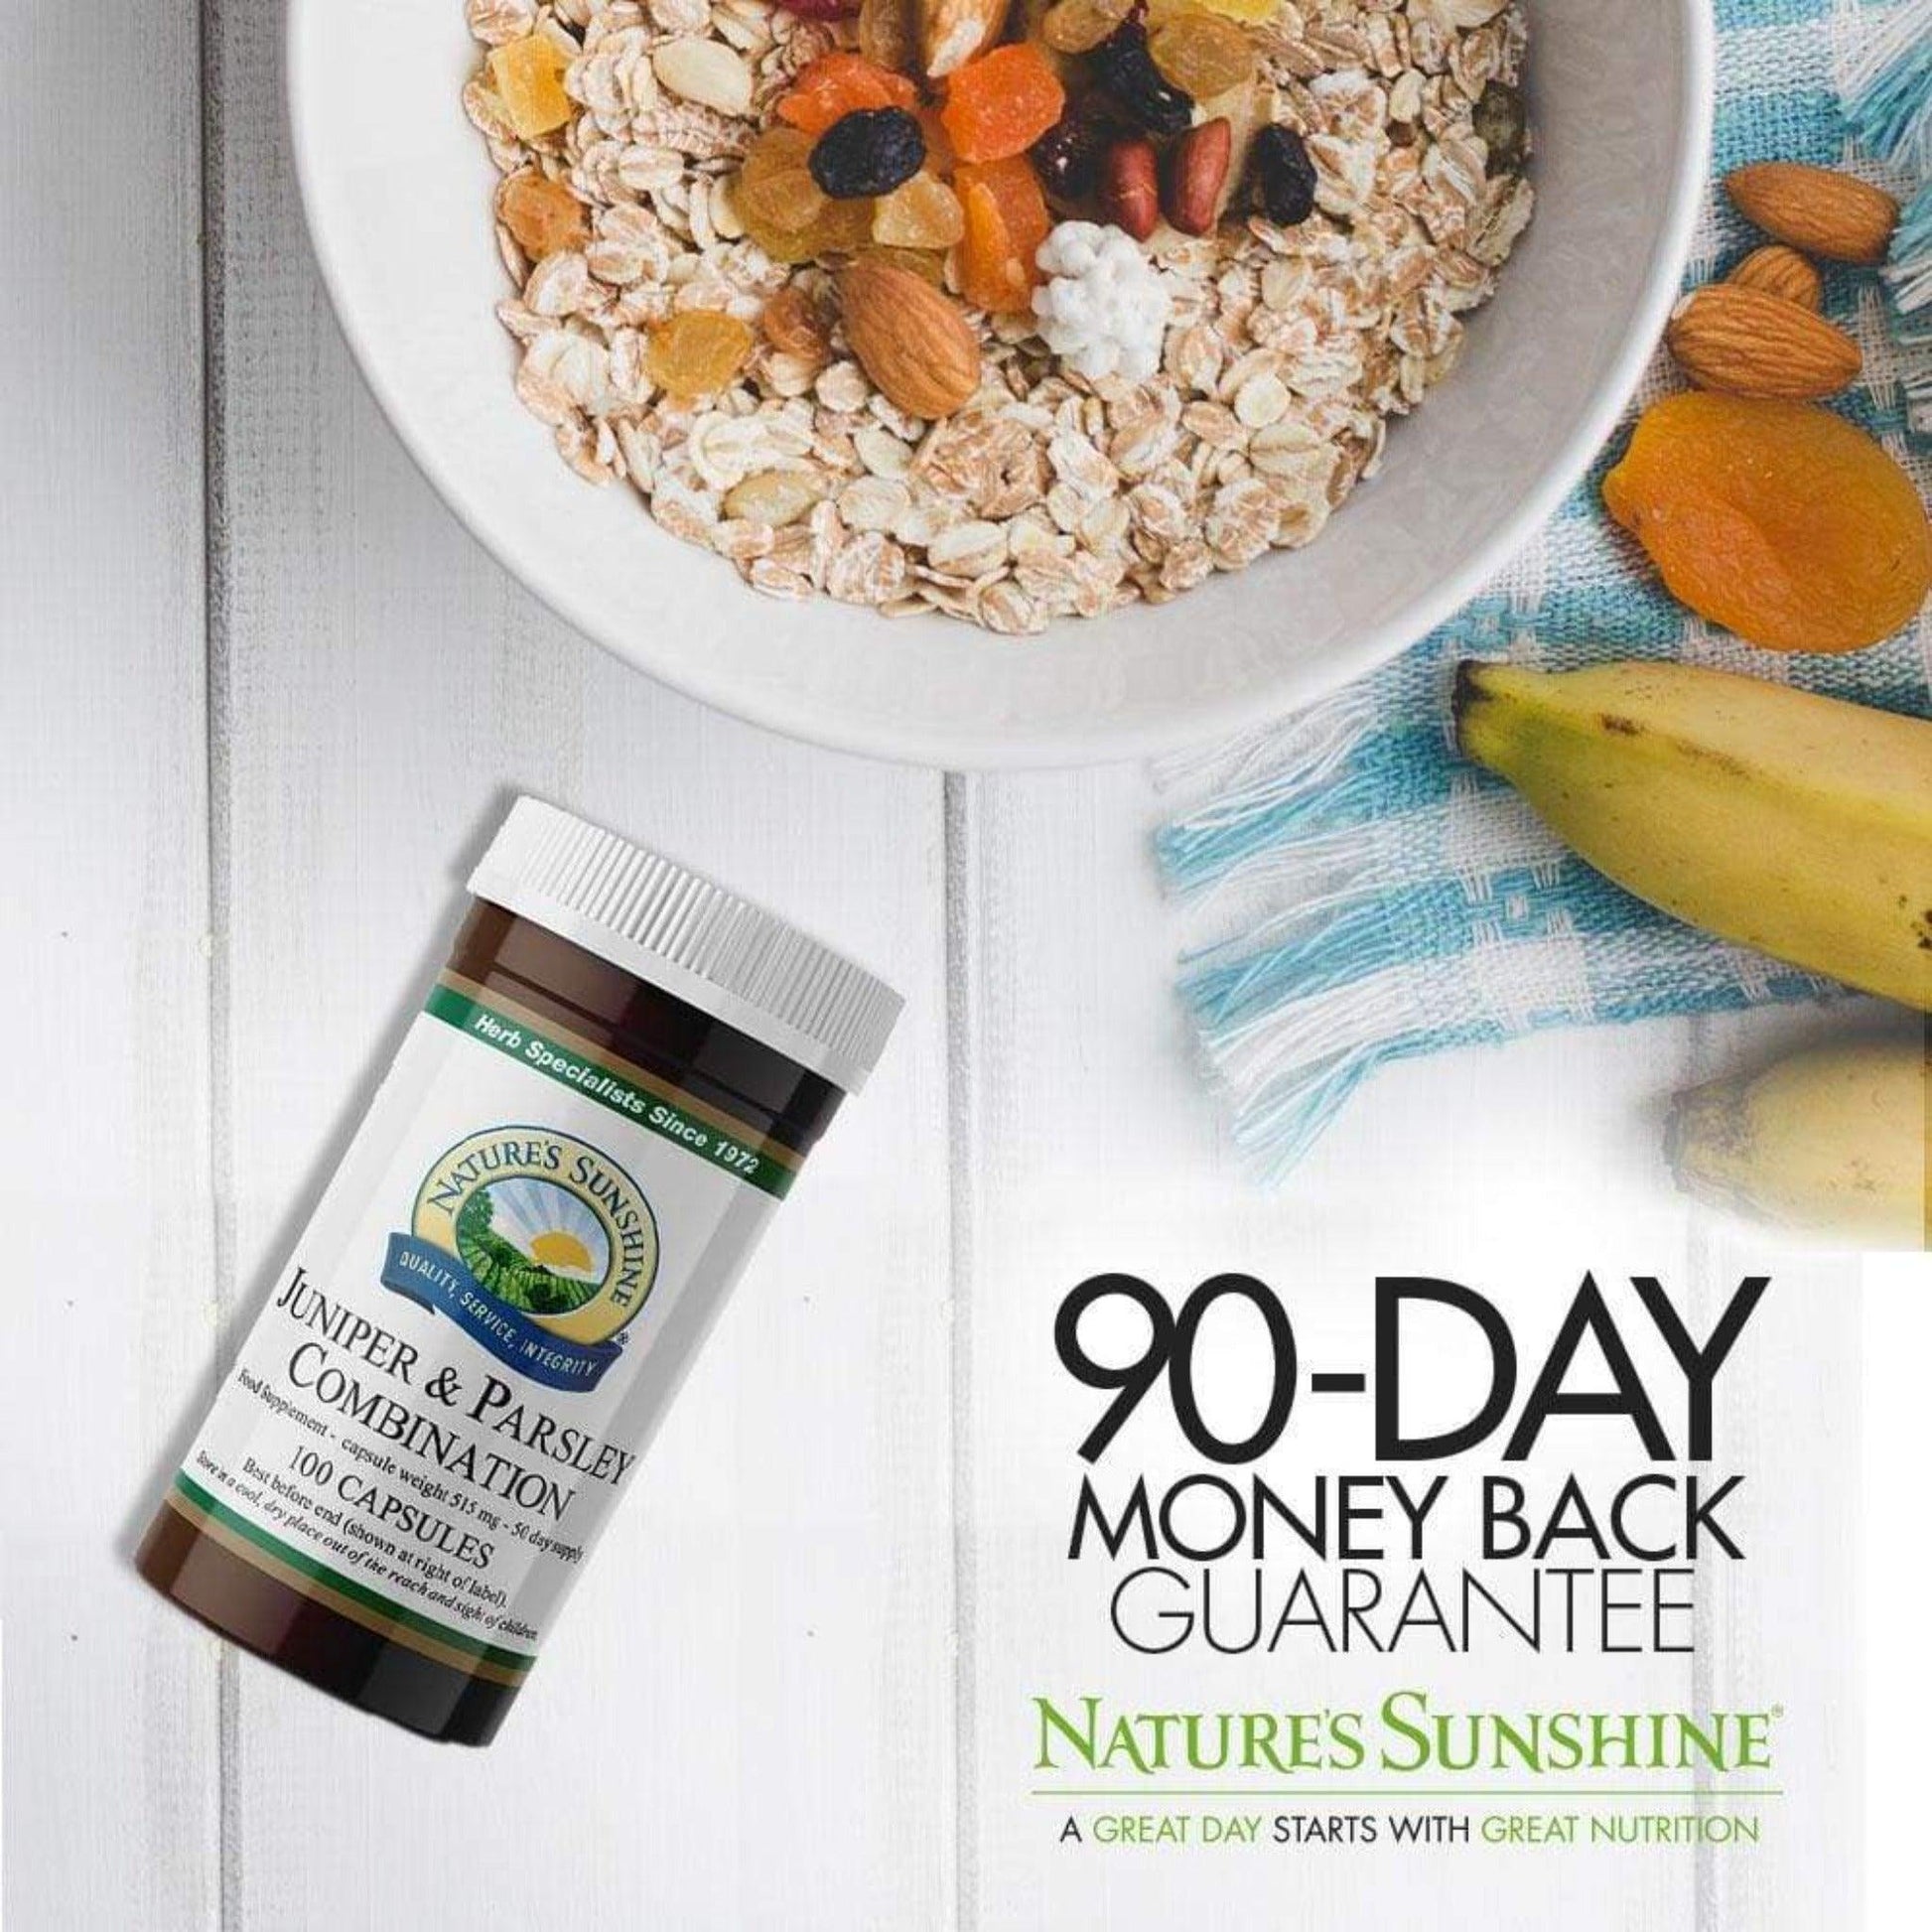 Nature’s Sunshine Juniper and Parsley Combination comes with a 90-day money back guarantee